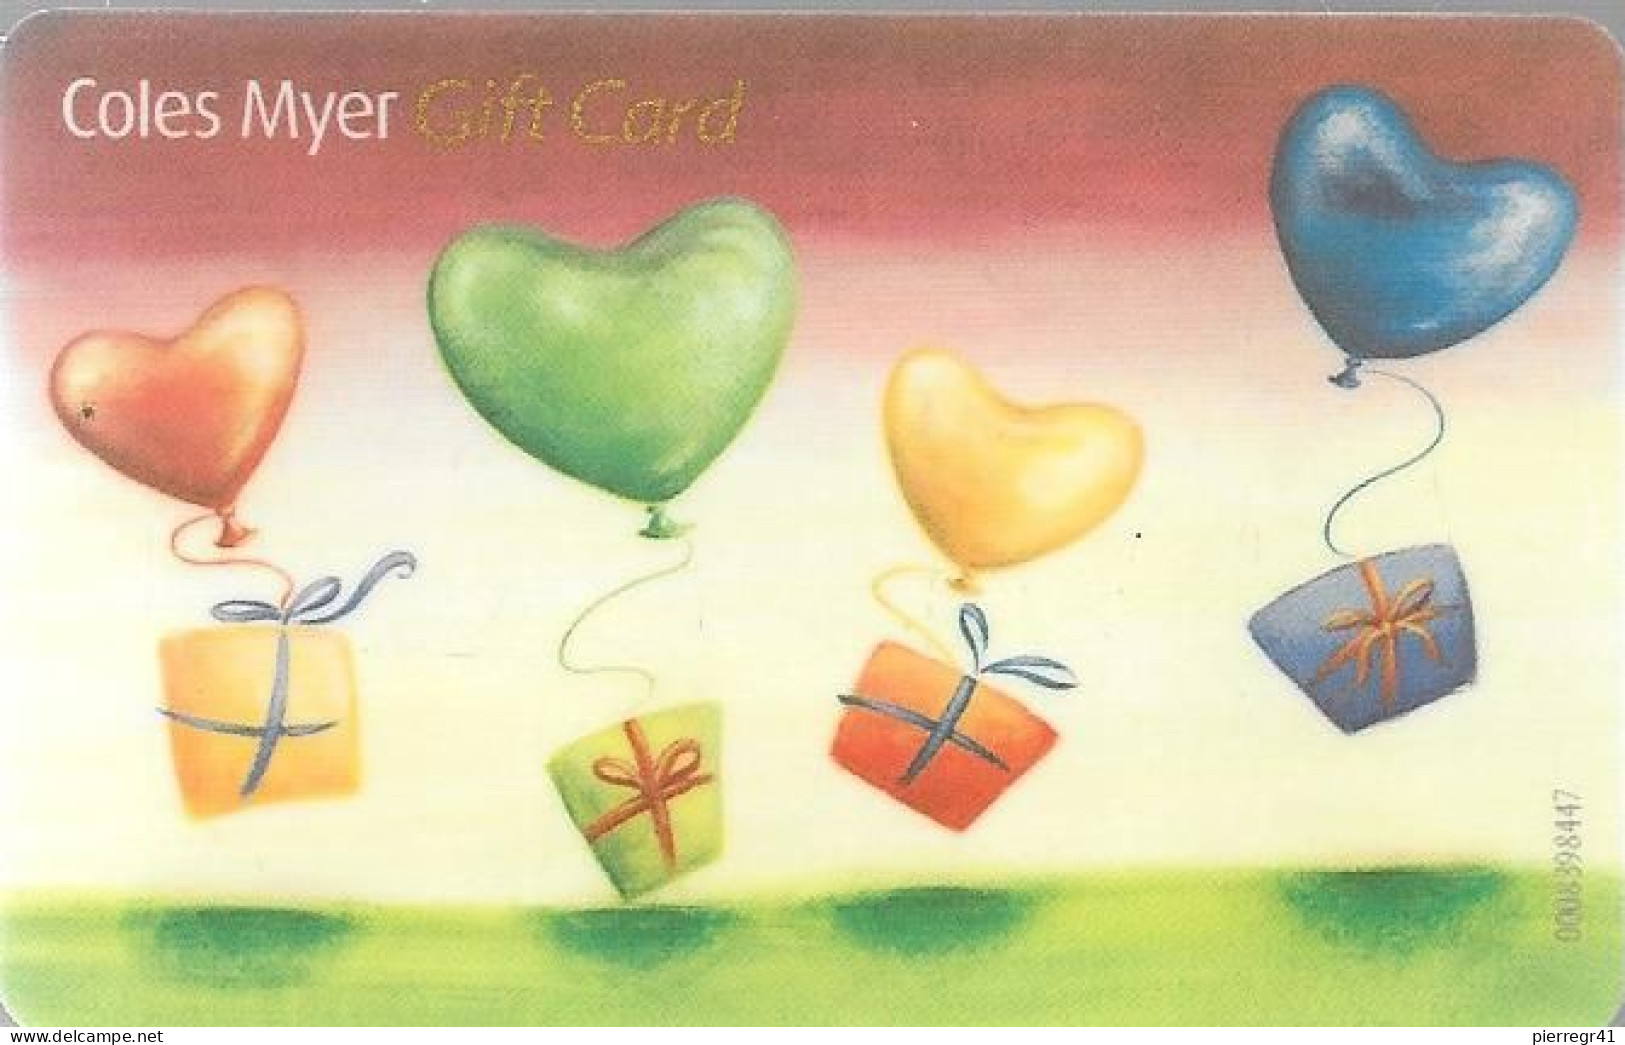 CARTE-GIFT MAGN-AUTRICHE-Coles Myer-TBE/RARE - Gift And Loyalty Cards